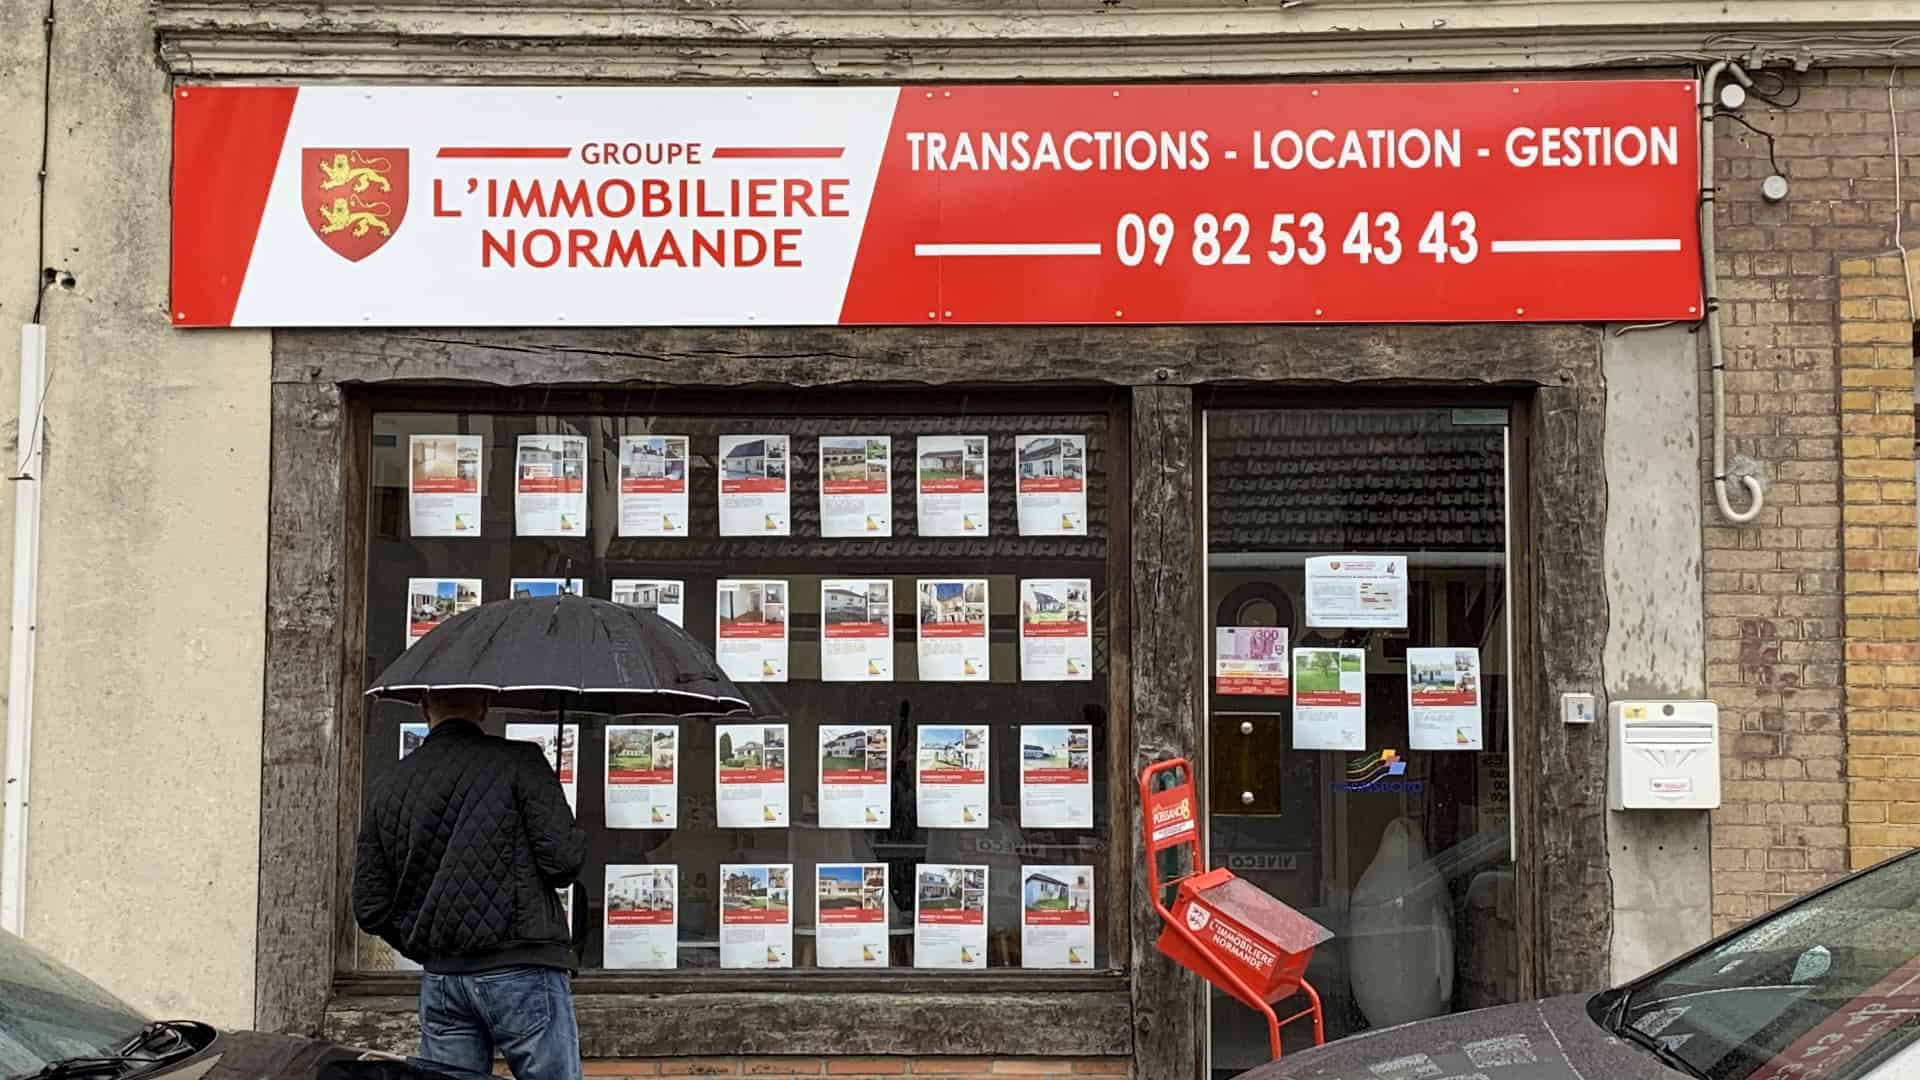 LImmobiliere Normande